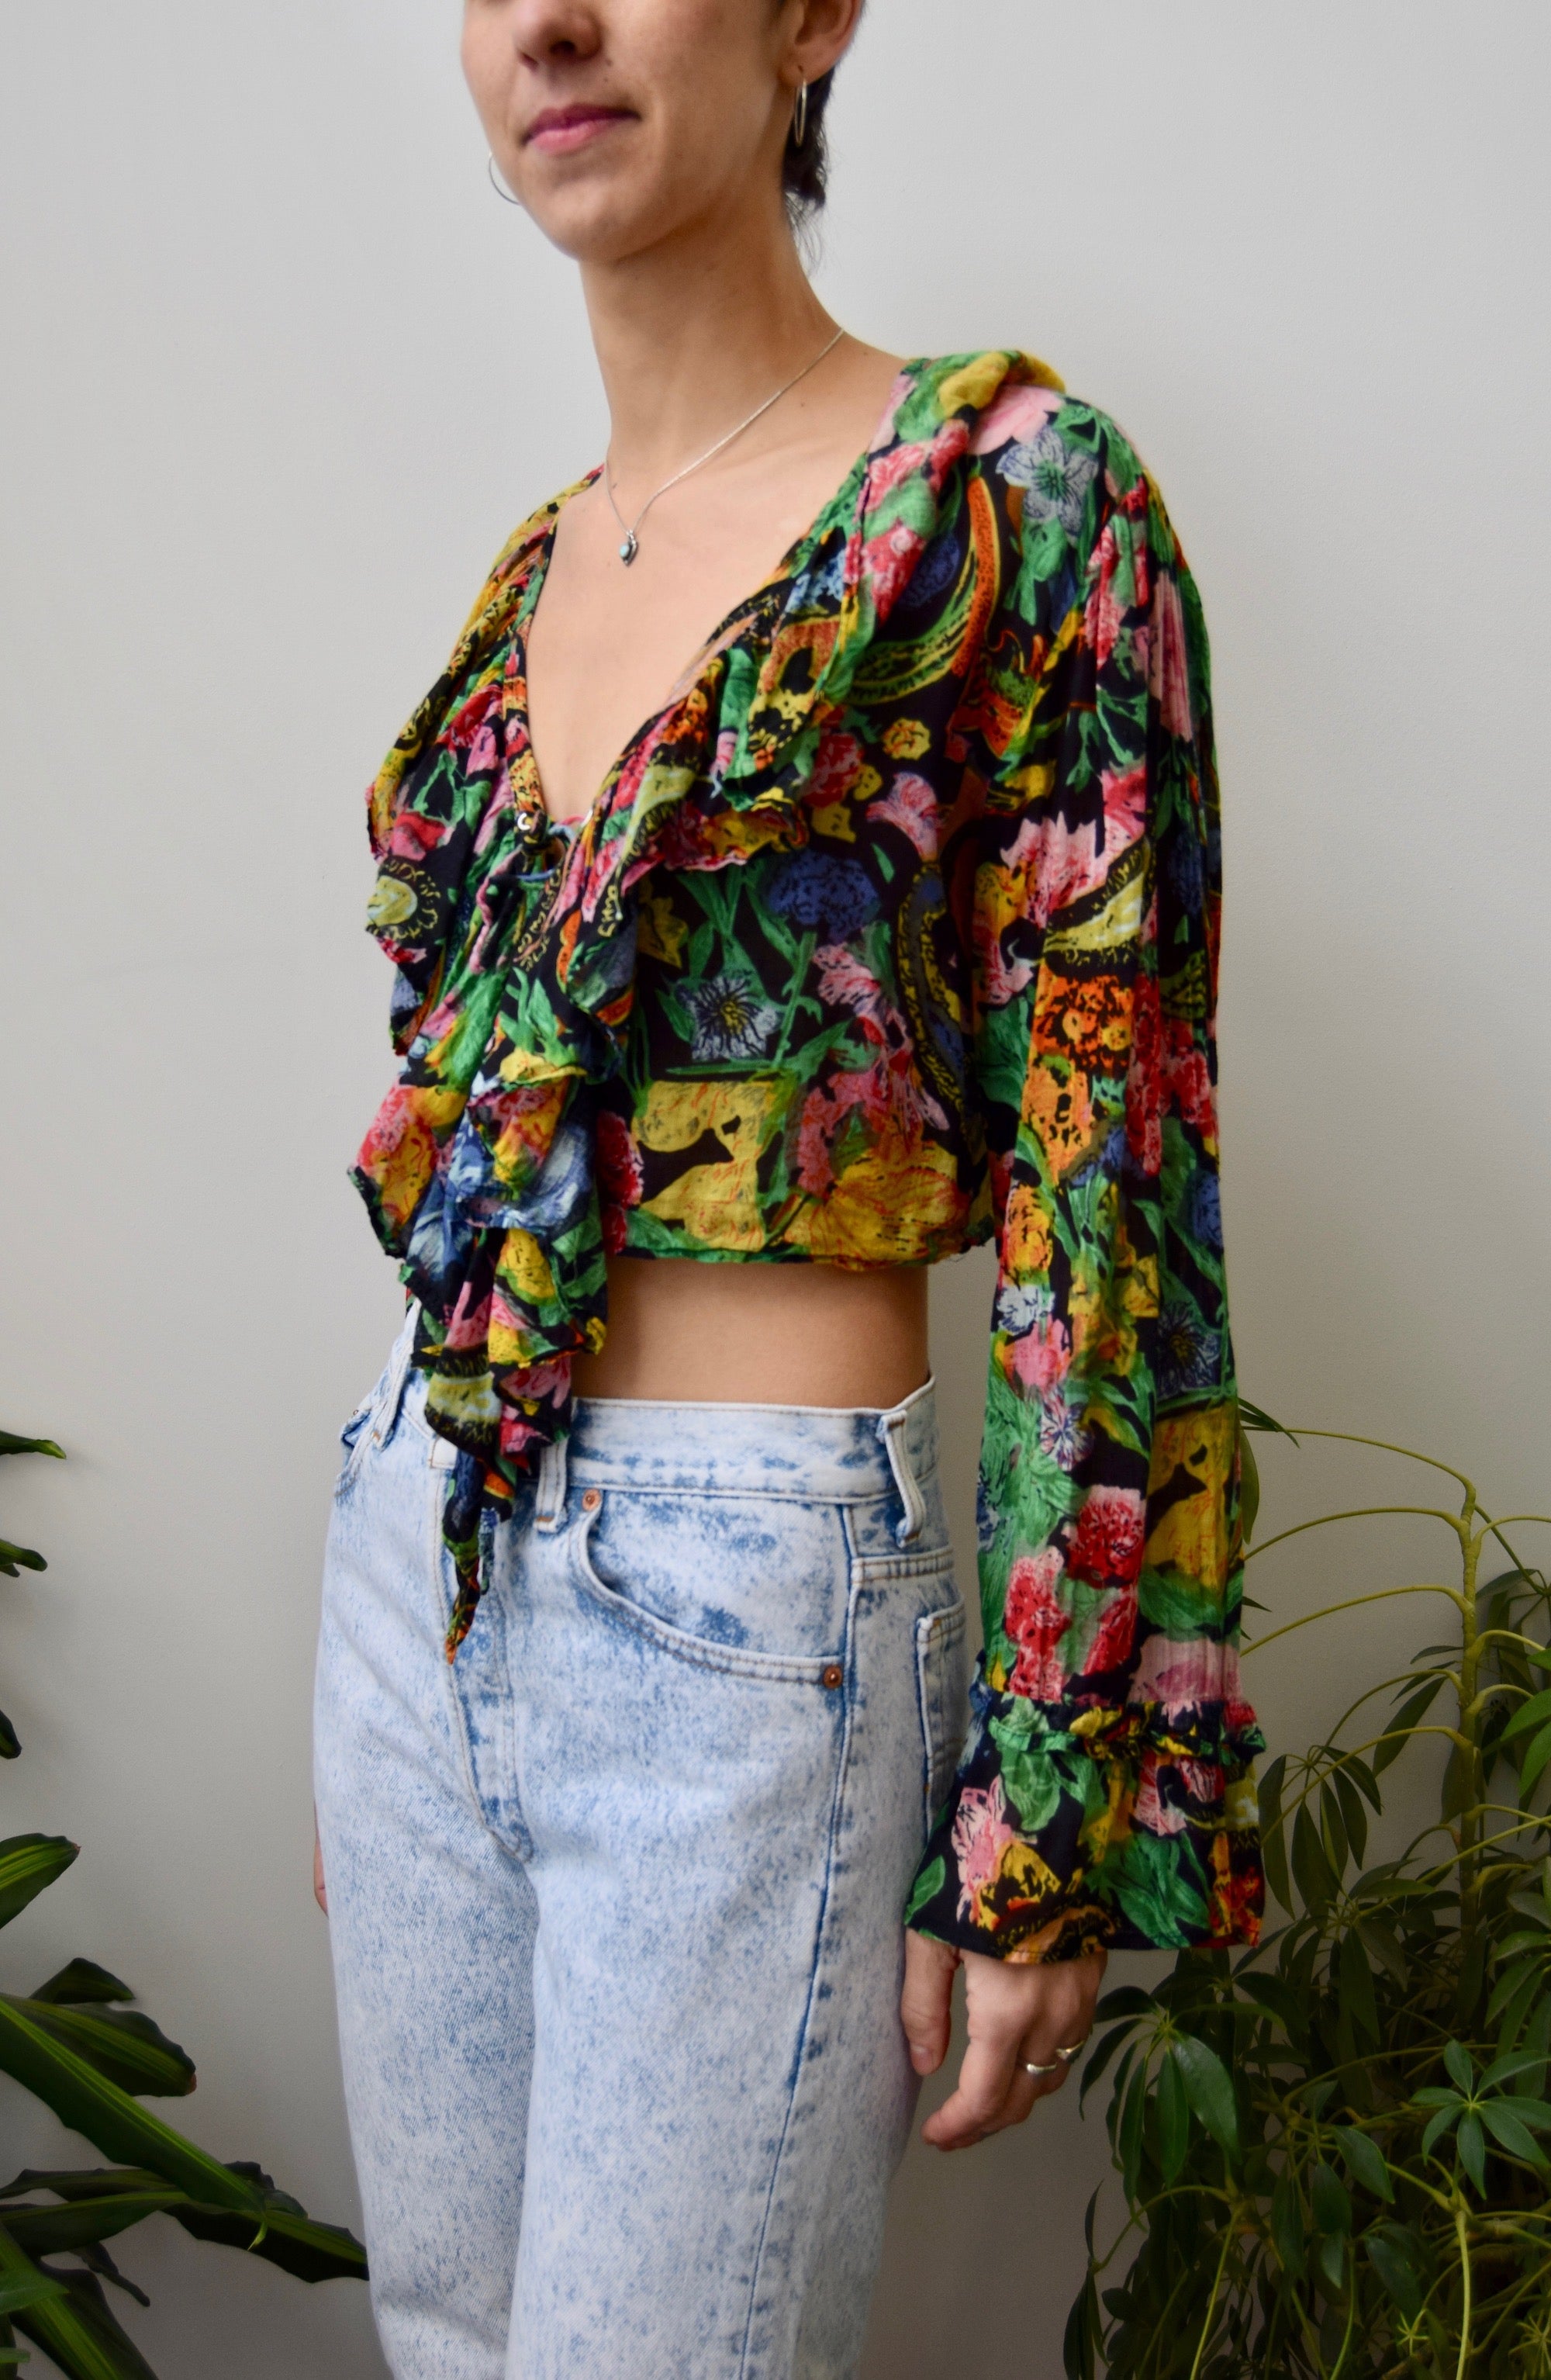 Floral Indian Cotton Ruffle Top